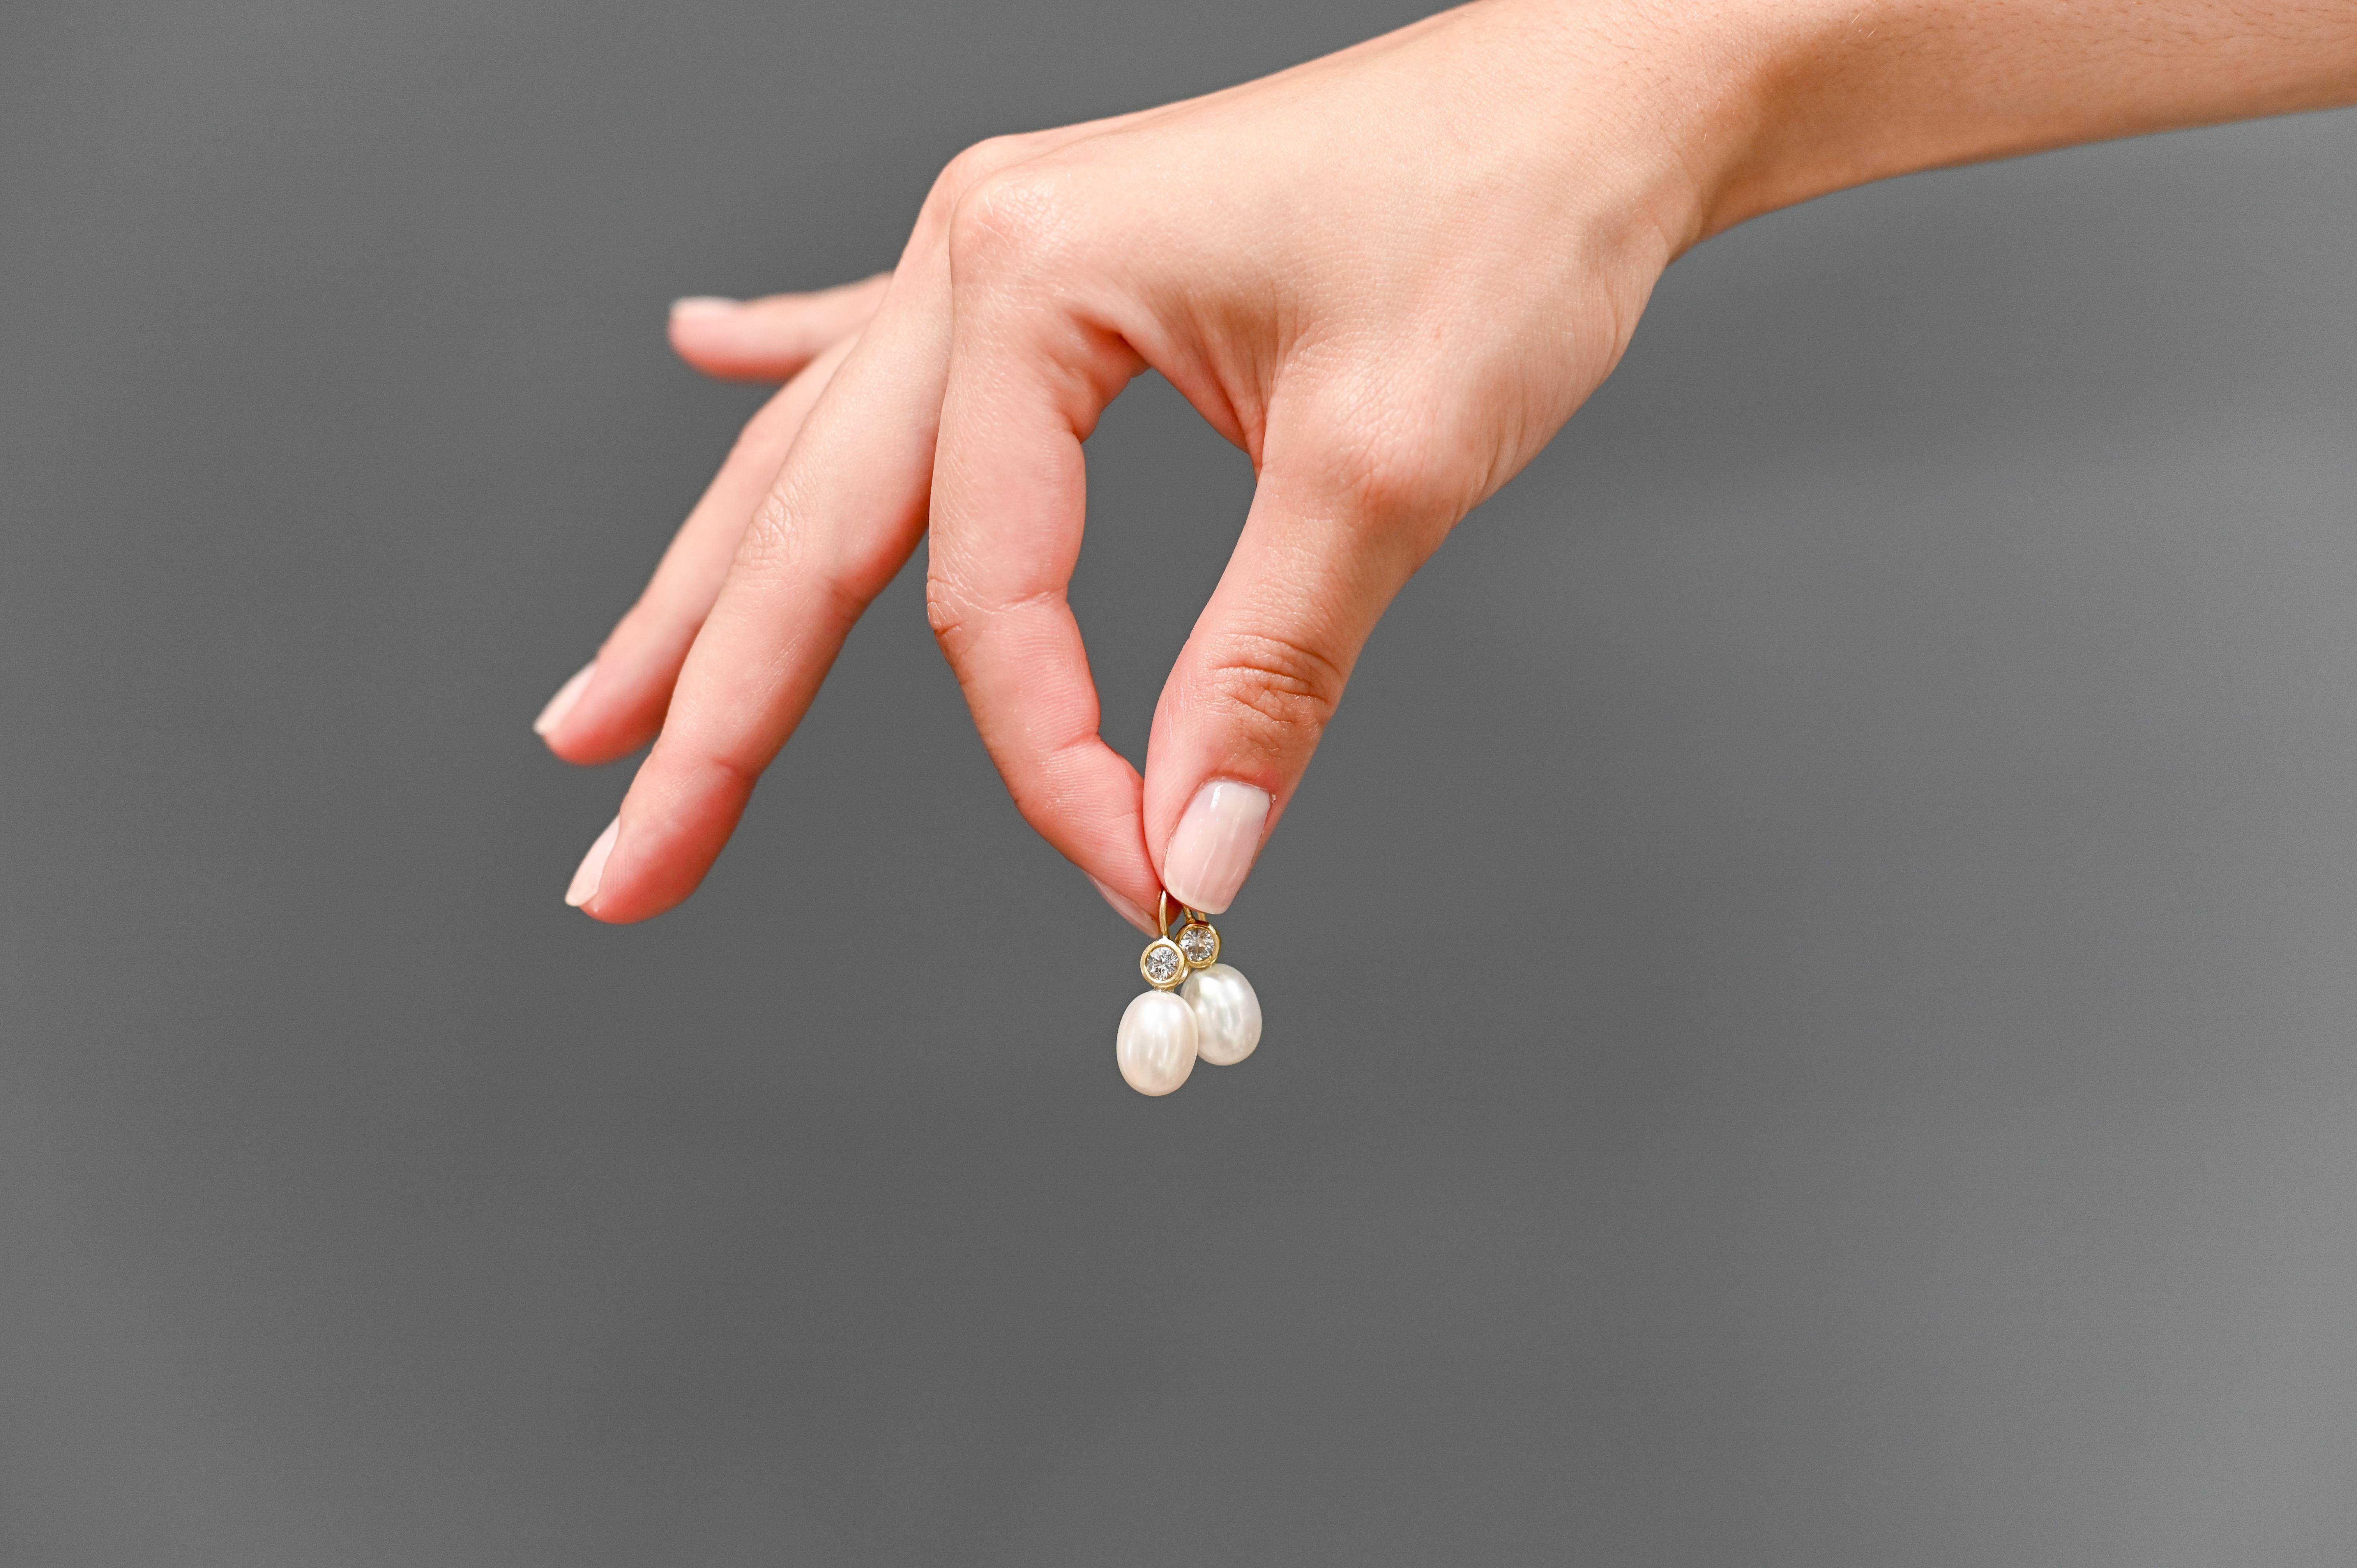 Faye Kim pairs beautiful white freshwater cultured pearl drops with White sapphires in 18k gold for a timeless and elegant design.
Due to their organic nature, pearls will vary slightly in size, shape, and color.
Pearl size - 10+ MM
Length - .75